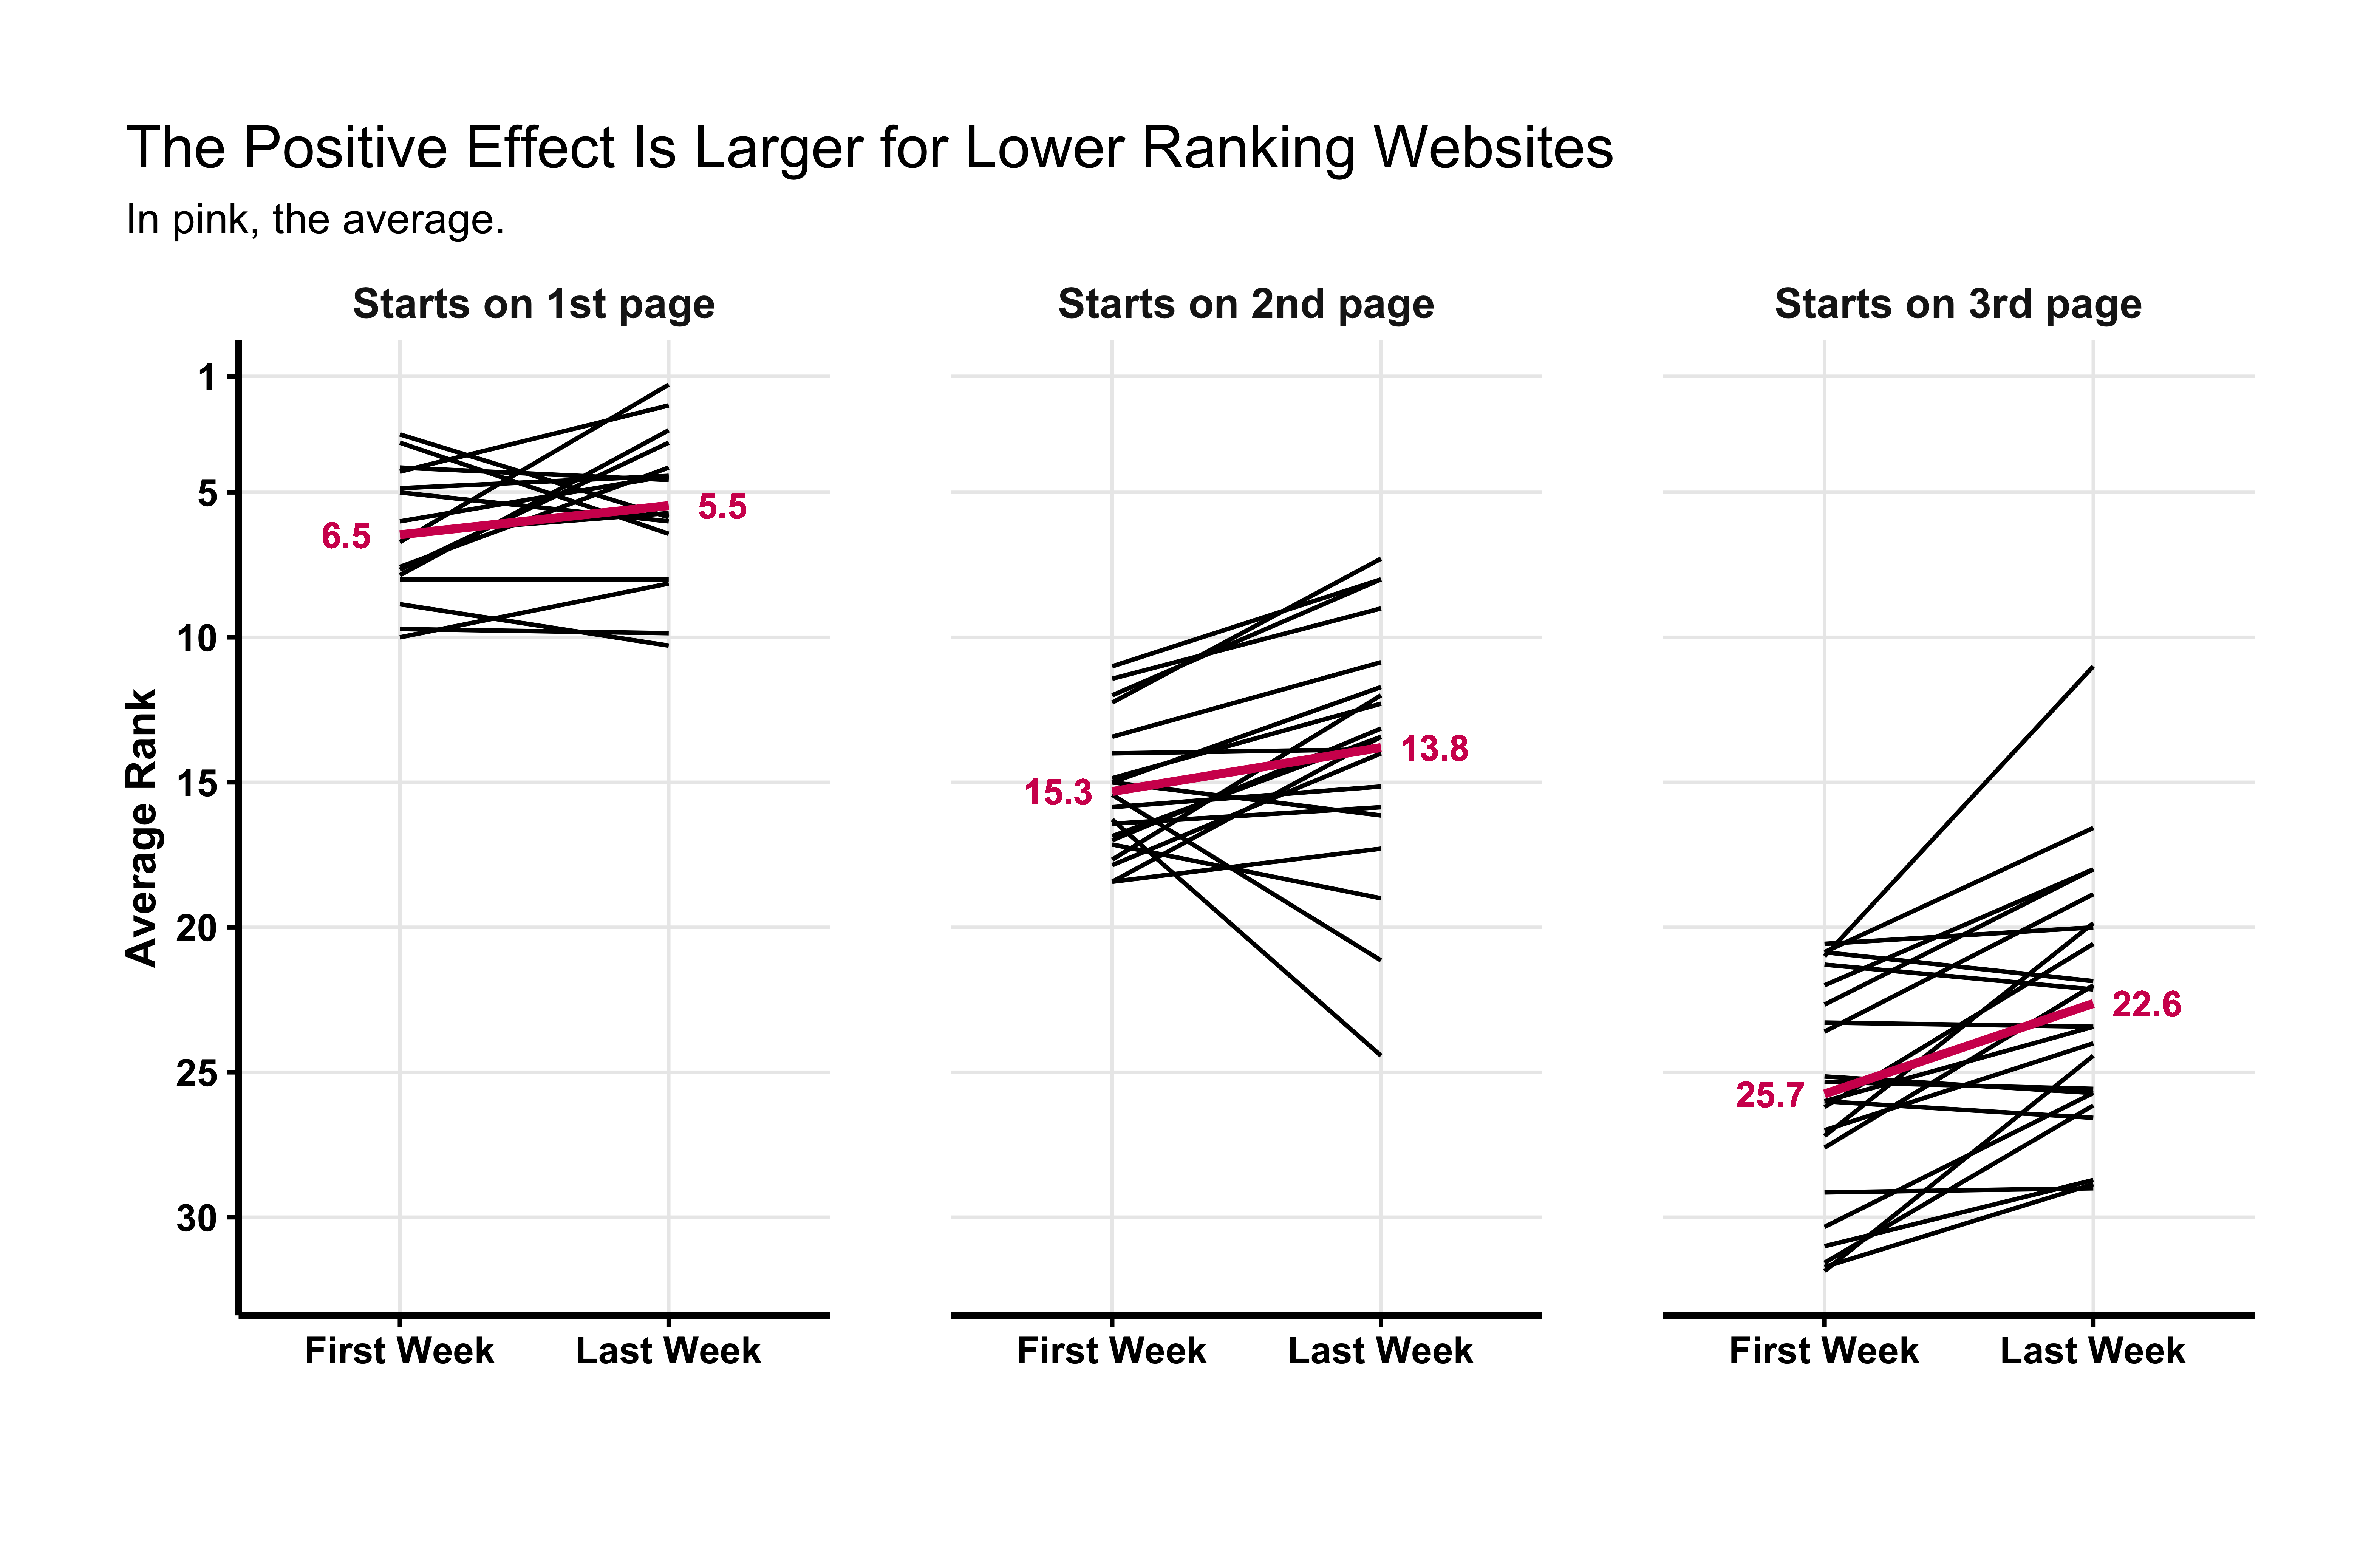 The positive effect of the boost is visible and is larger for lower ranking websites.